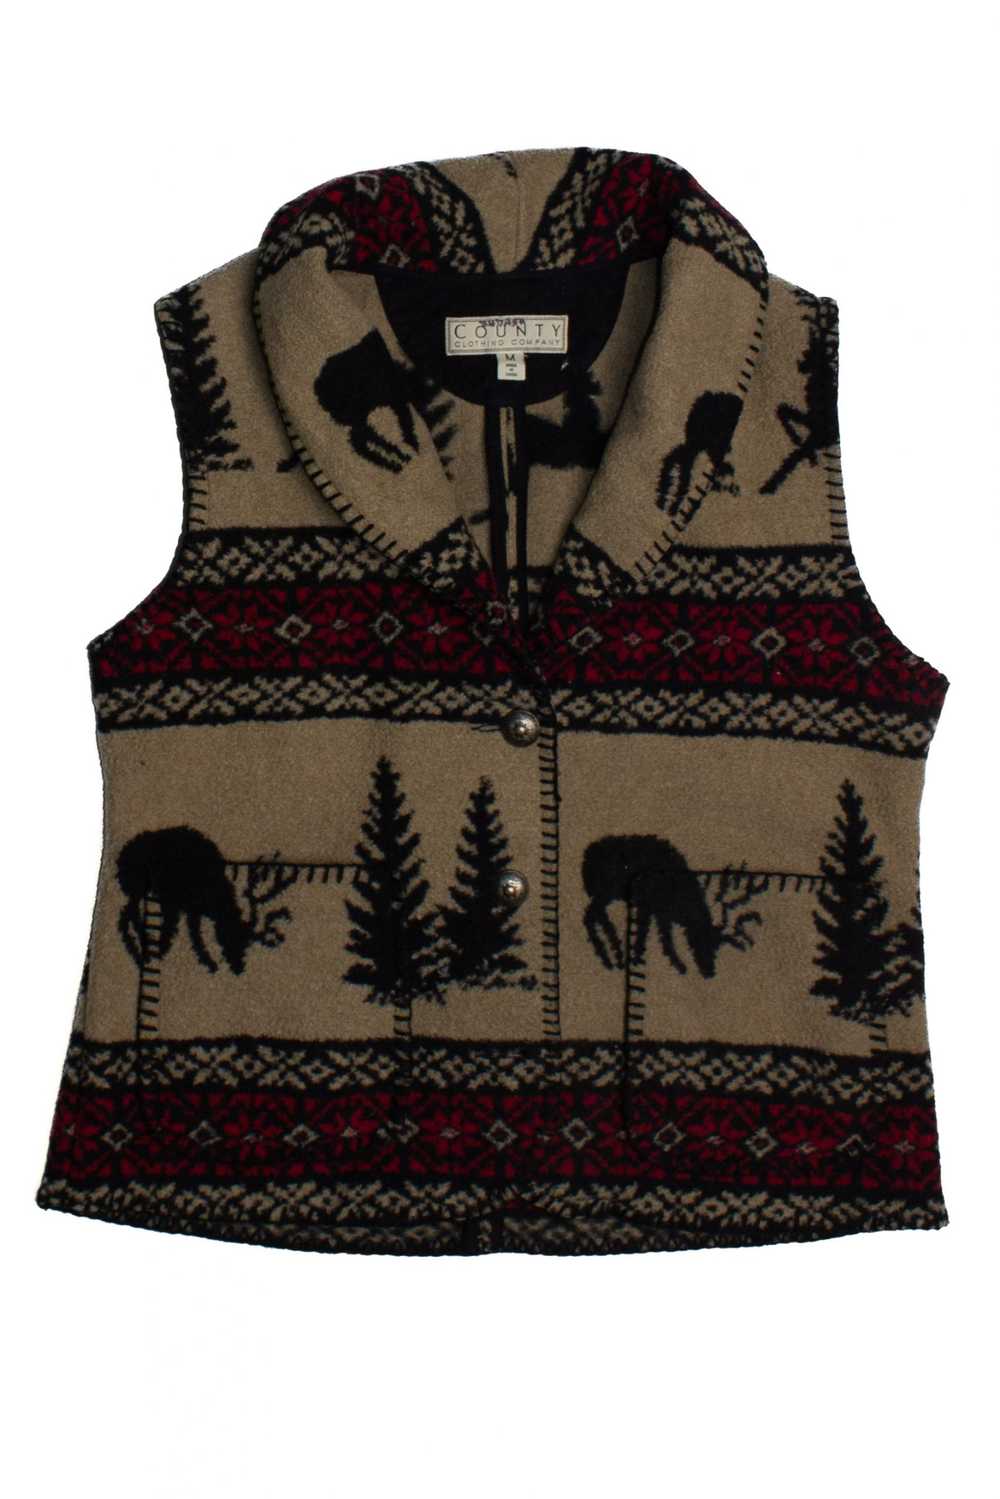 Vintage County Clothing Company Vest (1990s) - image 2